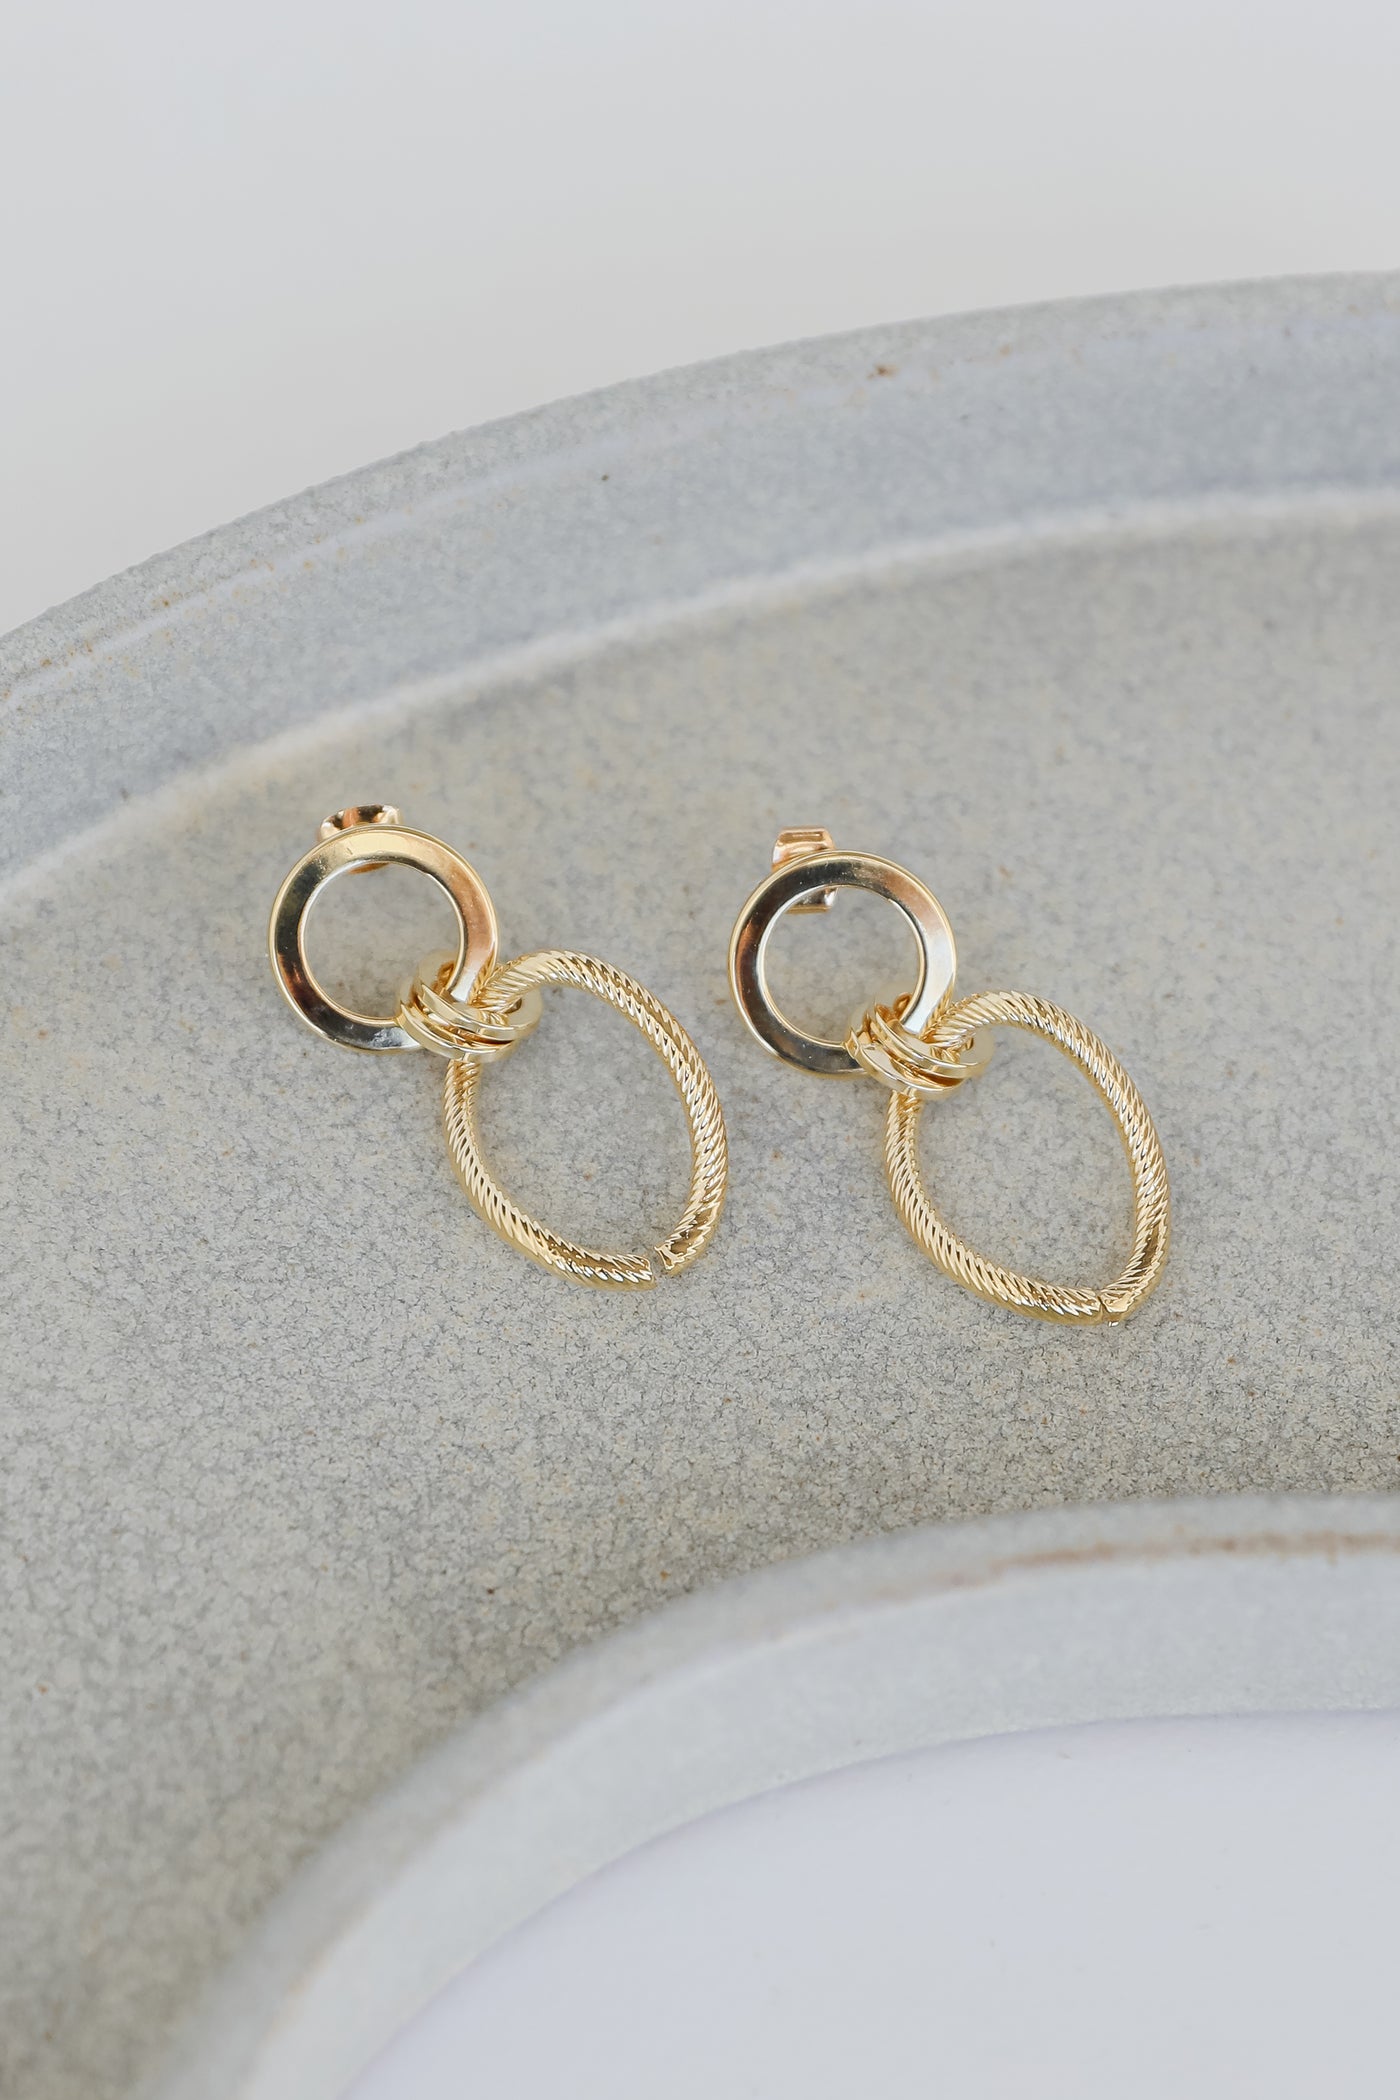 Gold Chainlink Drop Earrings close up